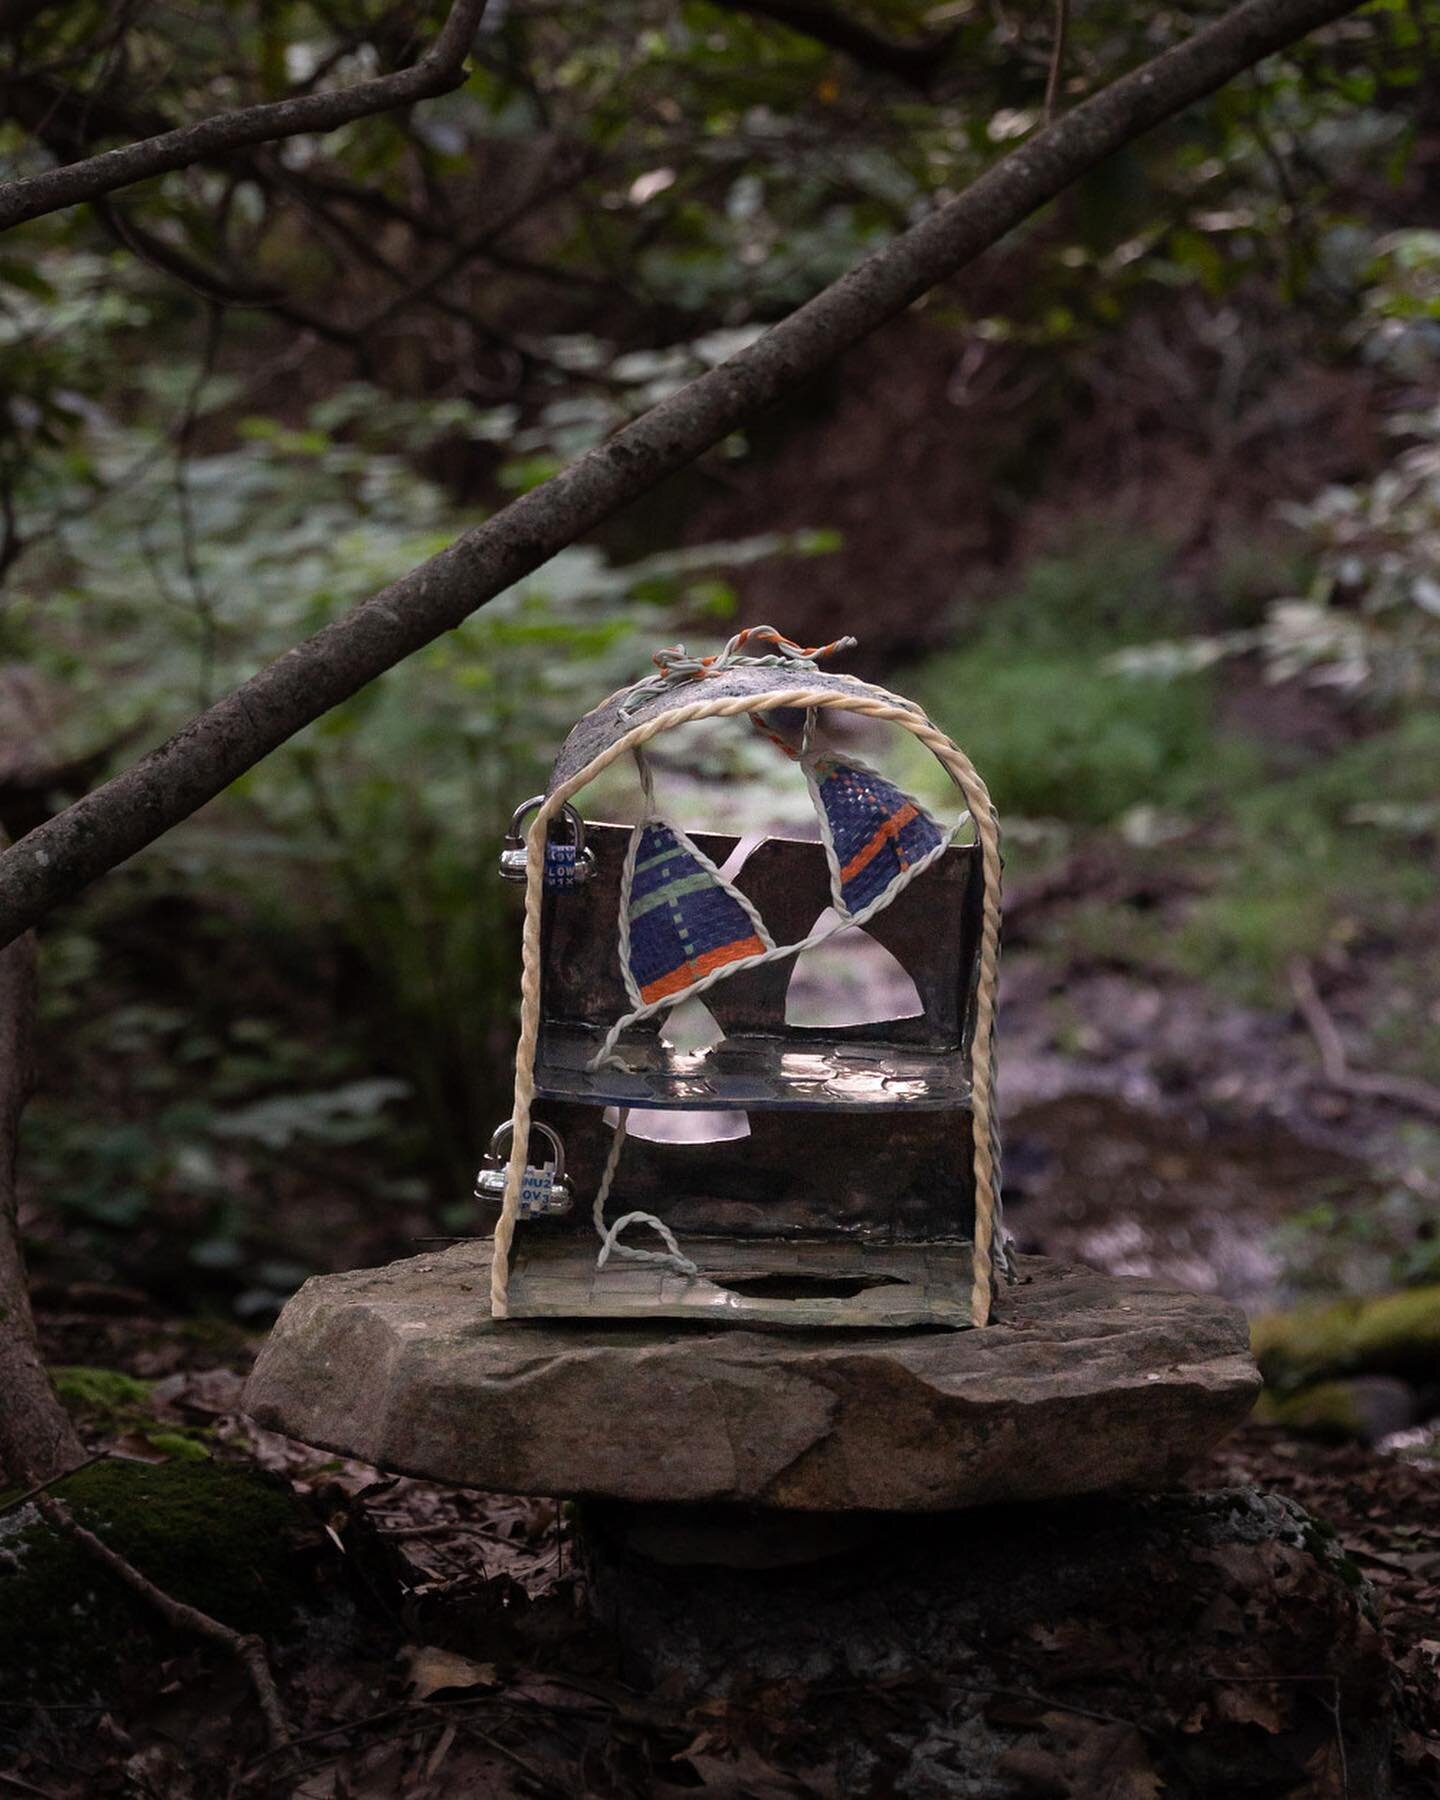 At the meeting point of two small creeks (&ldquo;The Delta&rdquo;), Sacha Ingber&rsquo;s intimate ceramic work sat atop a rock.

Sacha Ingber
B-E-L-O-W-A-B-O-V-E, 2019
glazed earthenware, suede, epoxy clay, stainless steel, padlocks
16 x 12.75 x 7.75